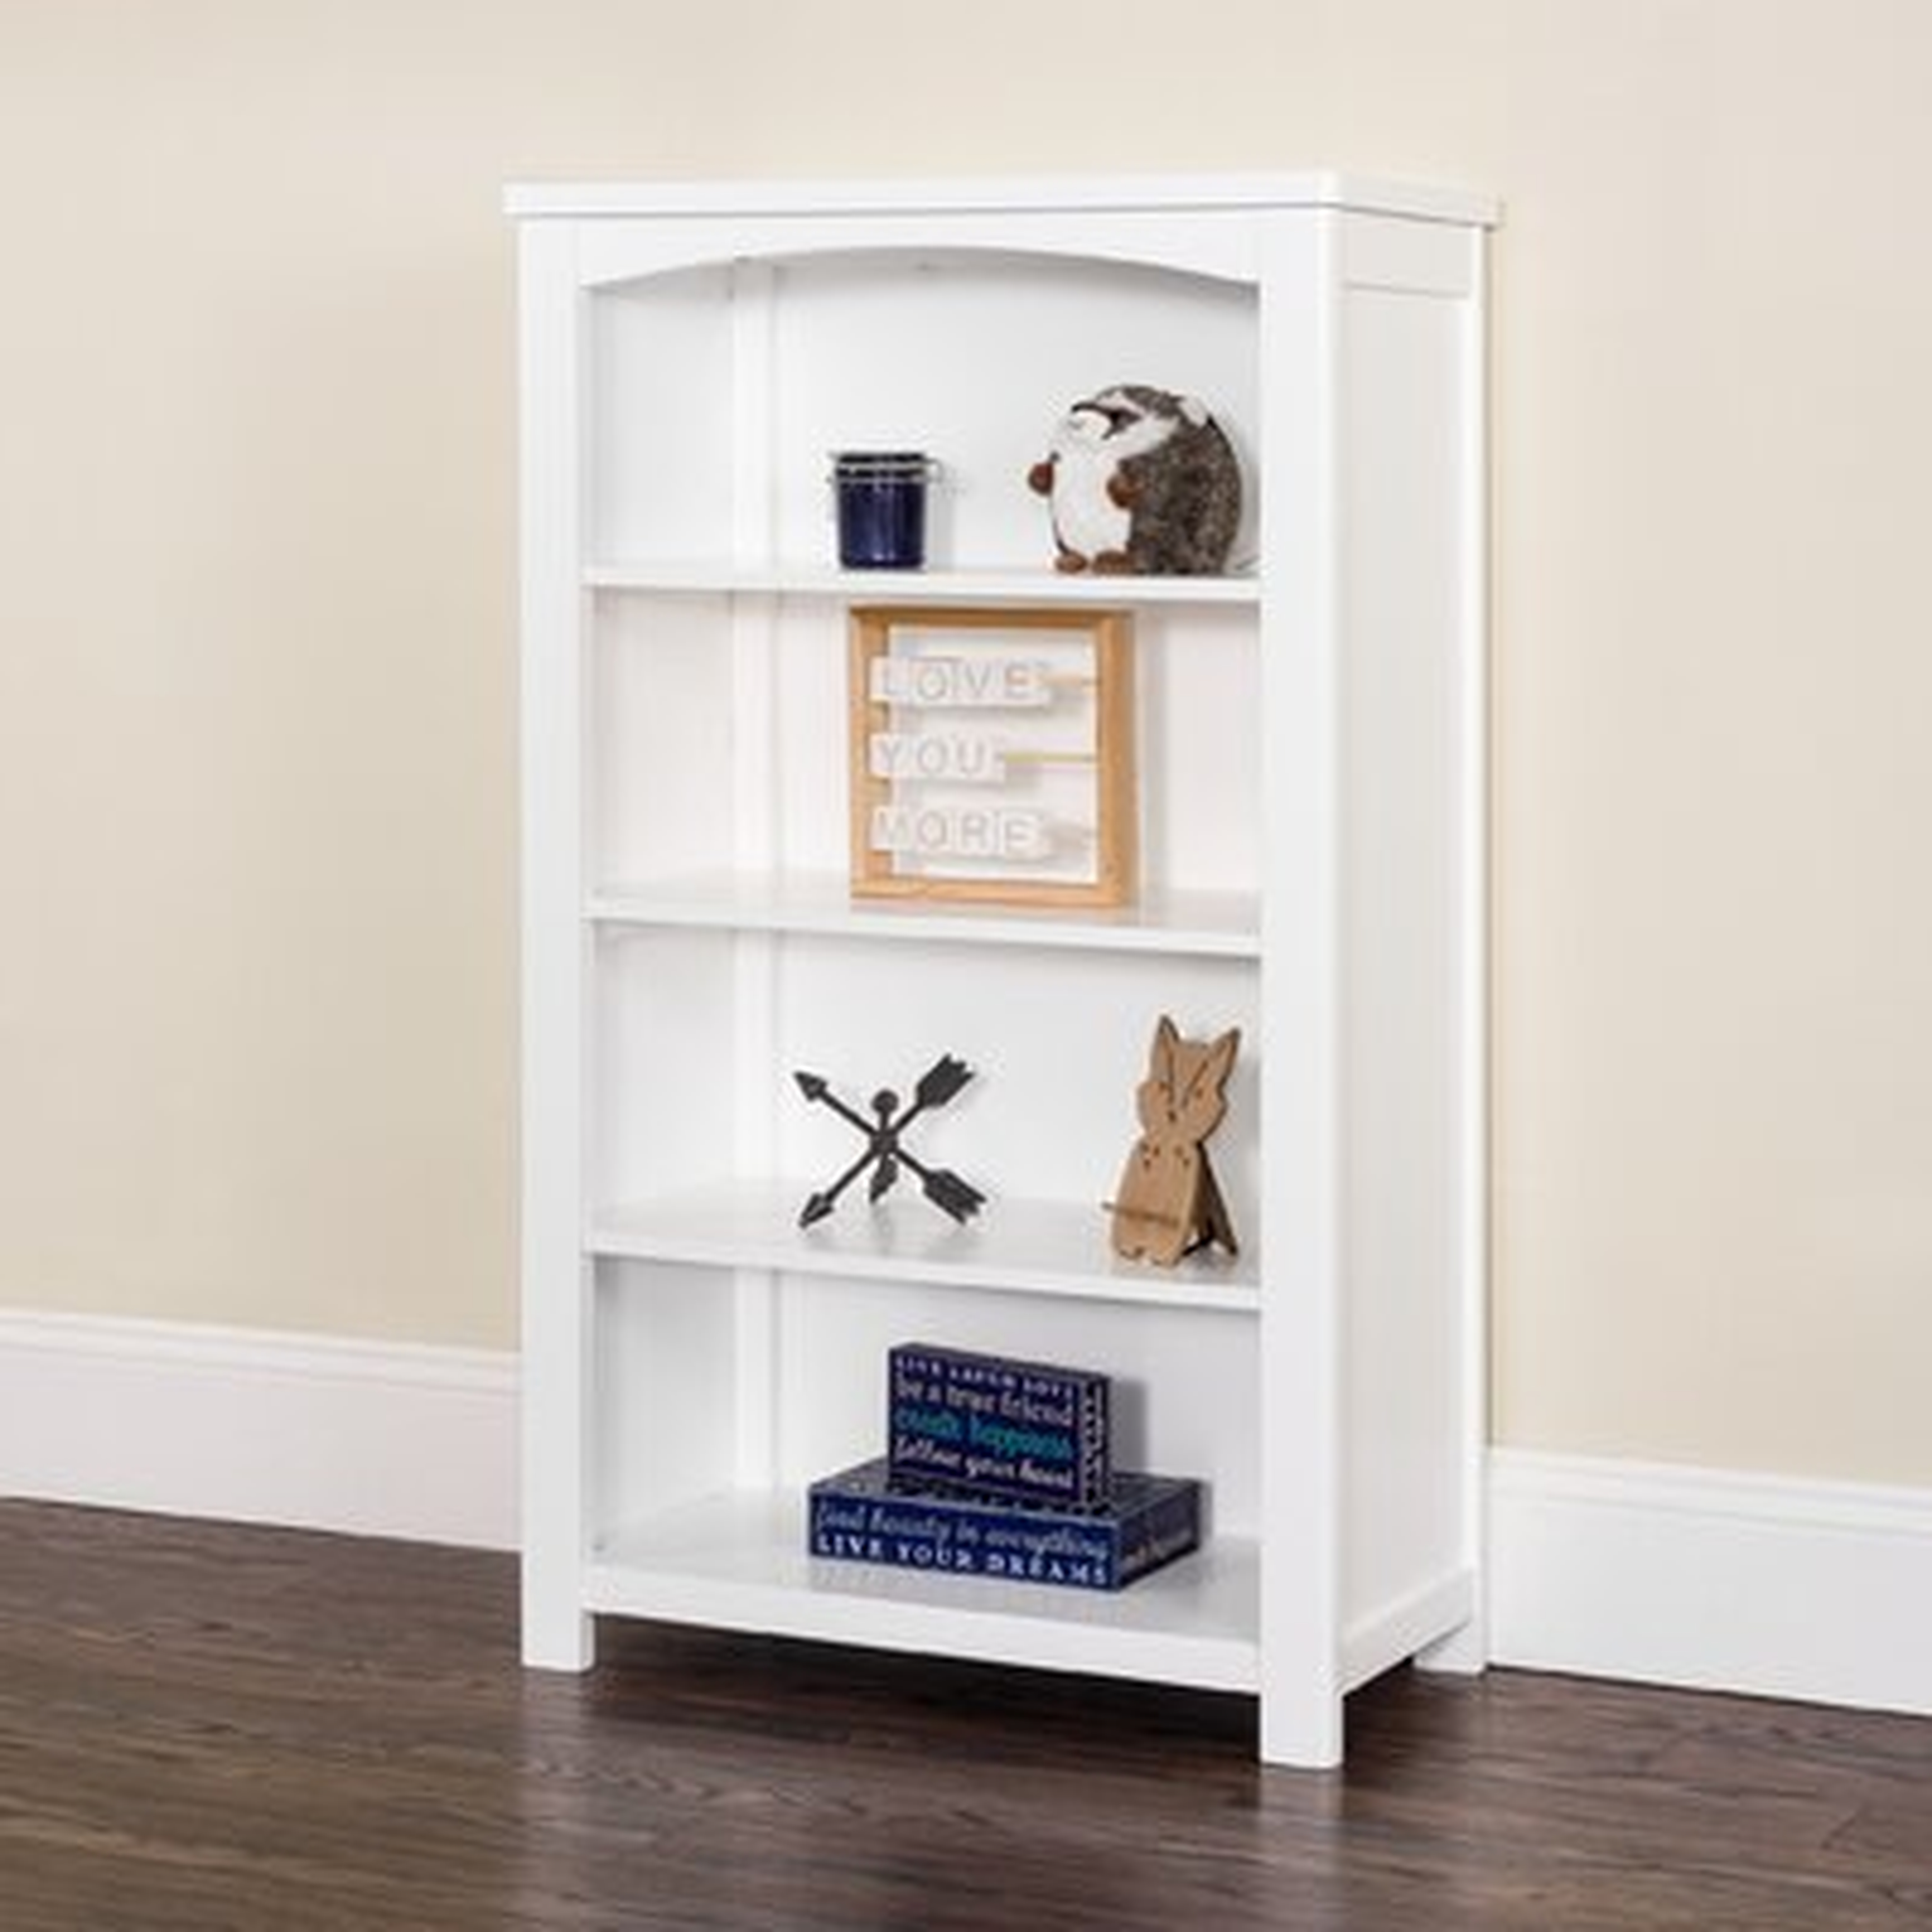 Forever Eclectic Harmony 50" Bookcase - Wayfair